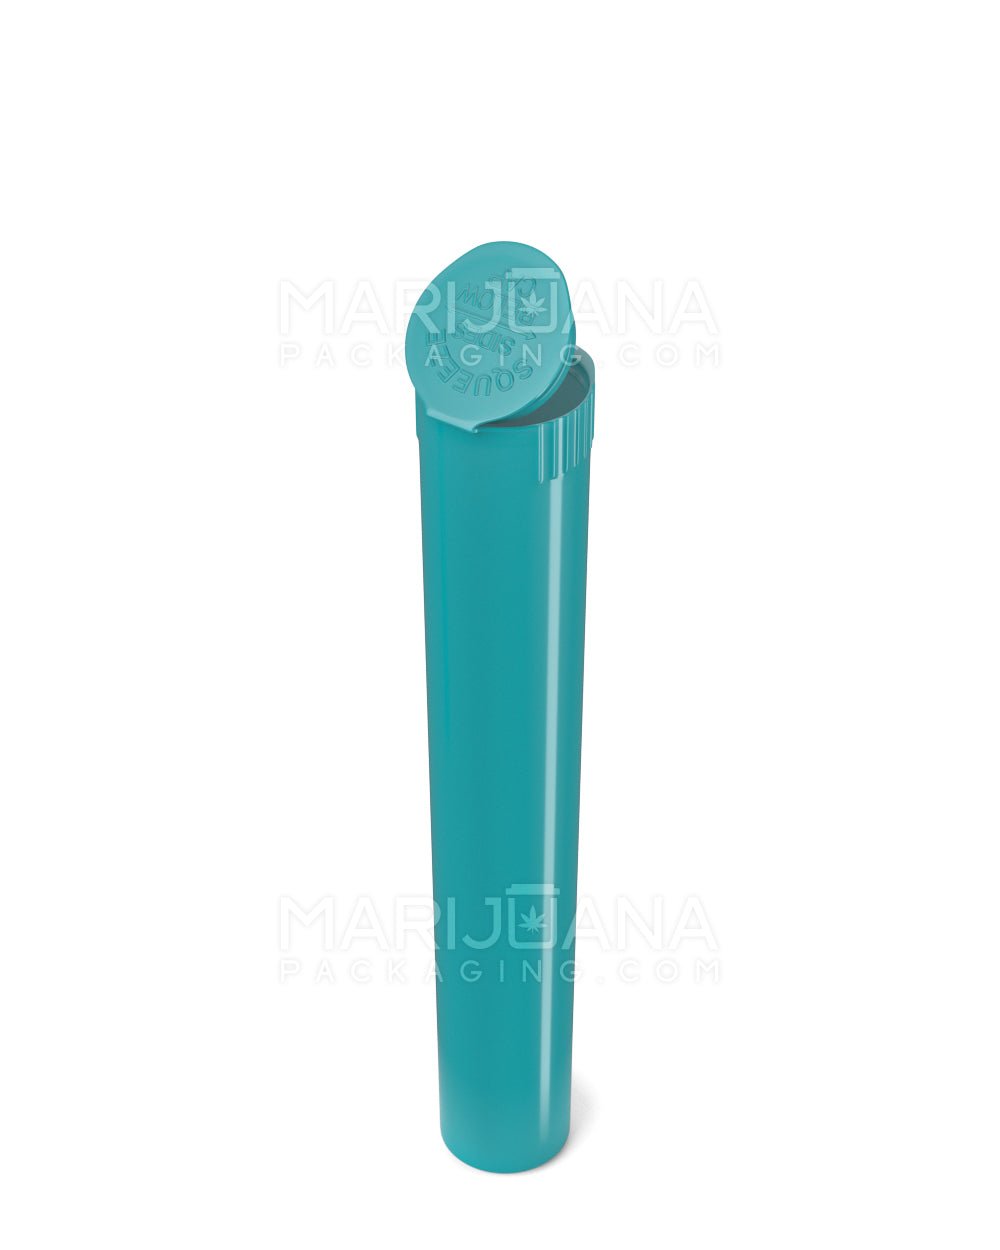 Child Resistant | King Size Pop Top Opaque Plastic Pre-Roll Tubes | 116mm - Teal - 1000 Count - 6